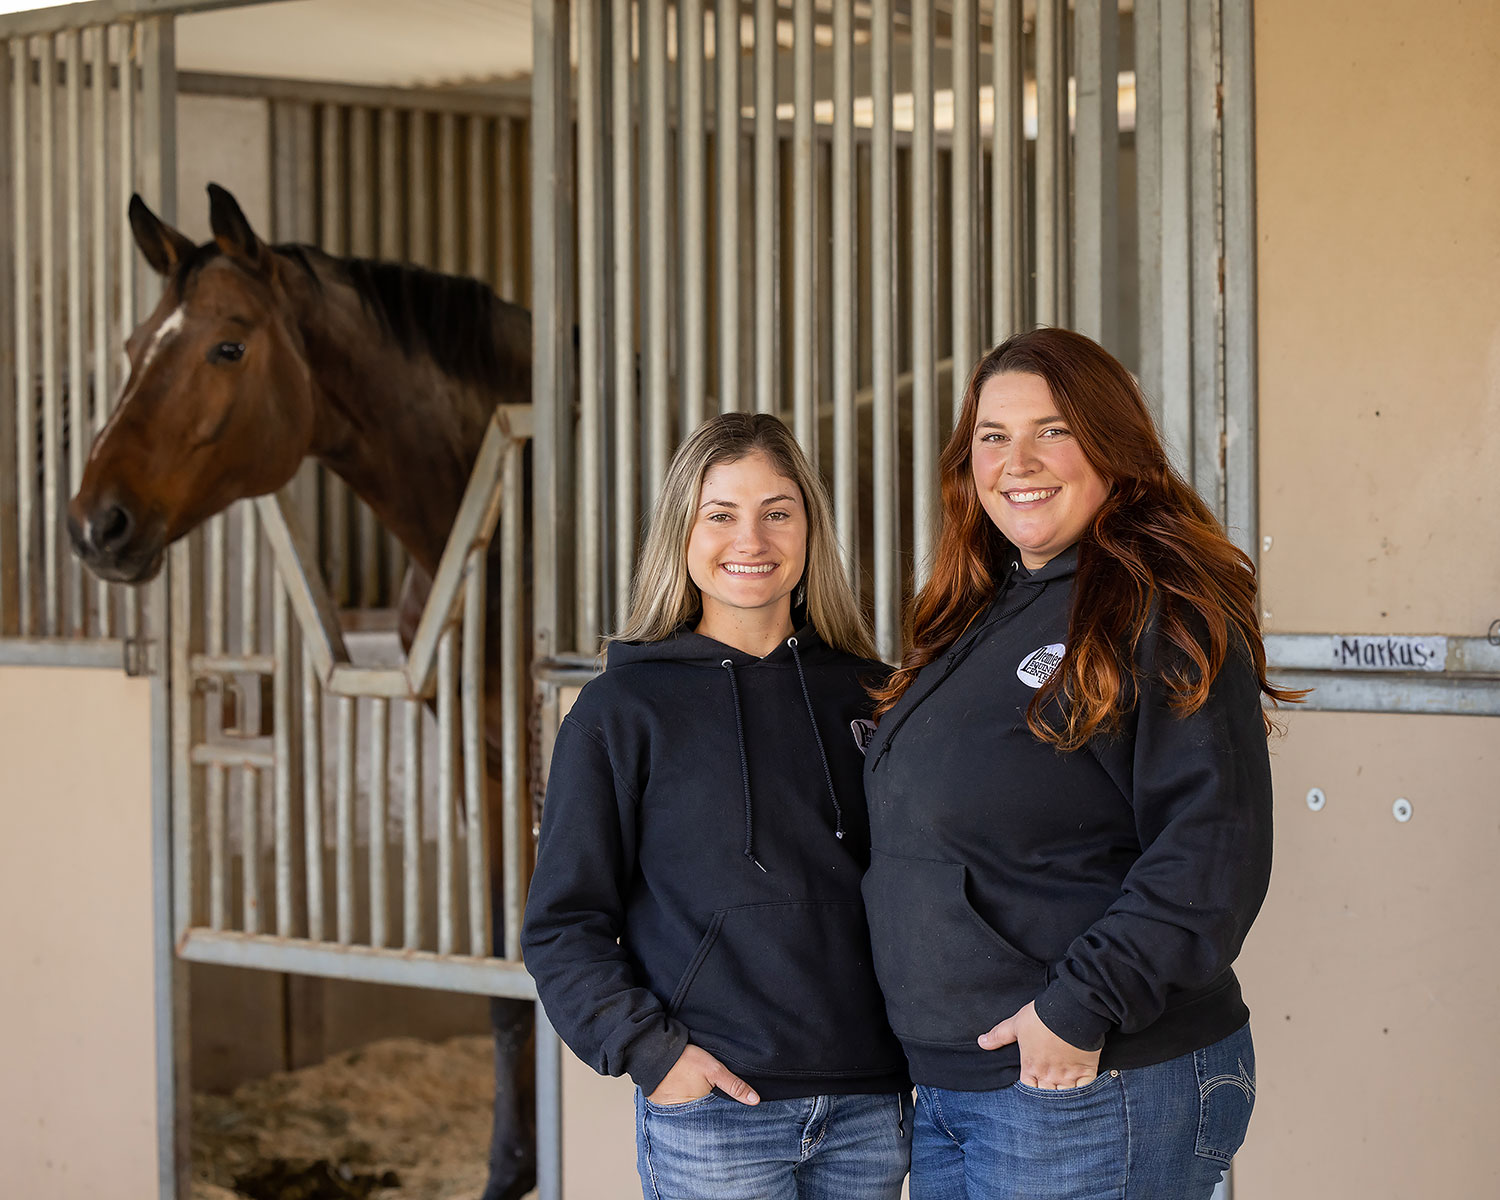 Managers At Premier Equine